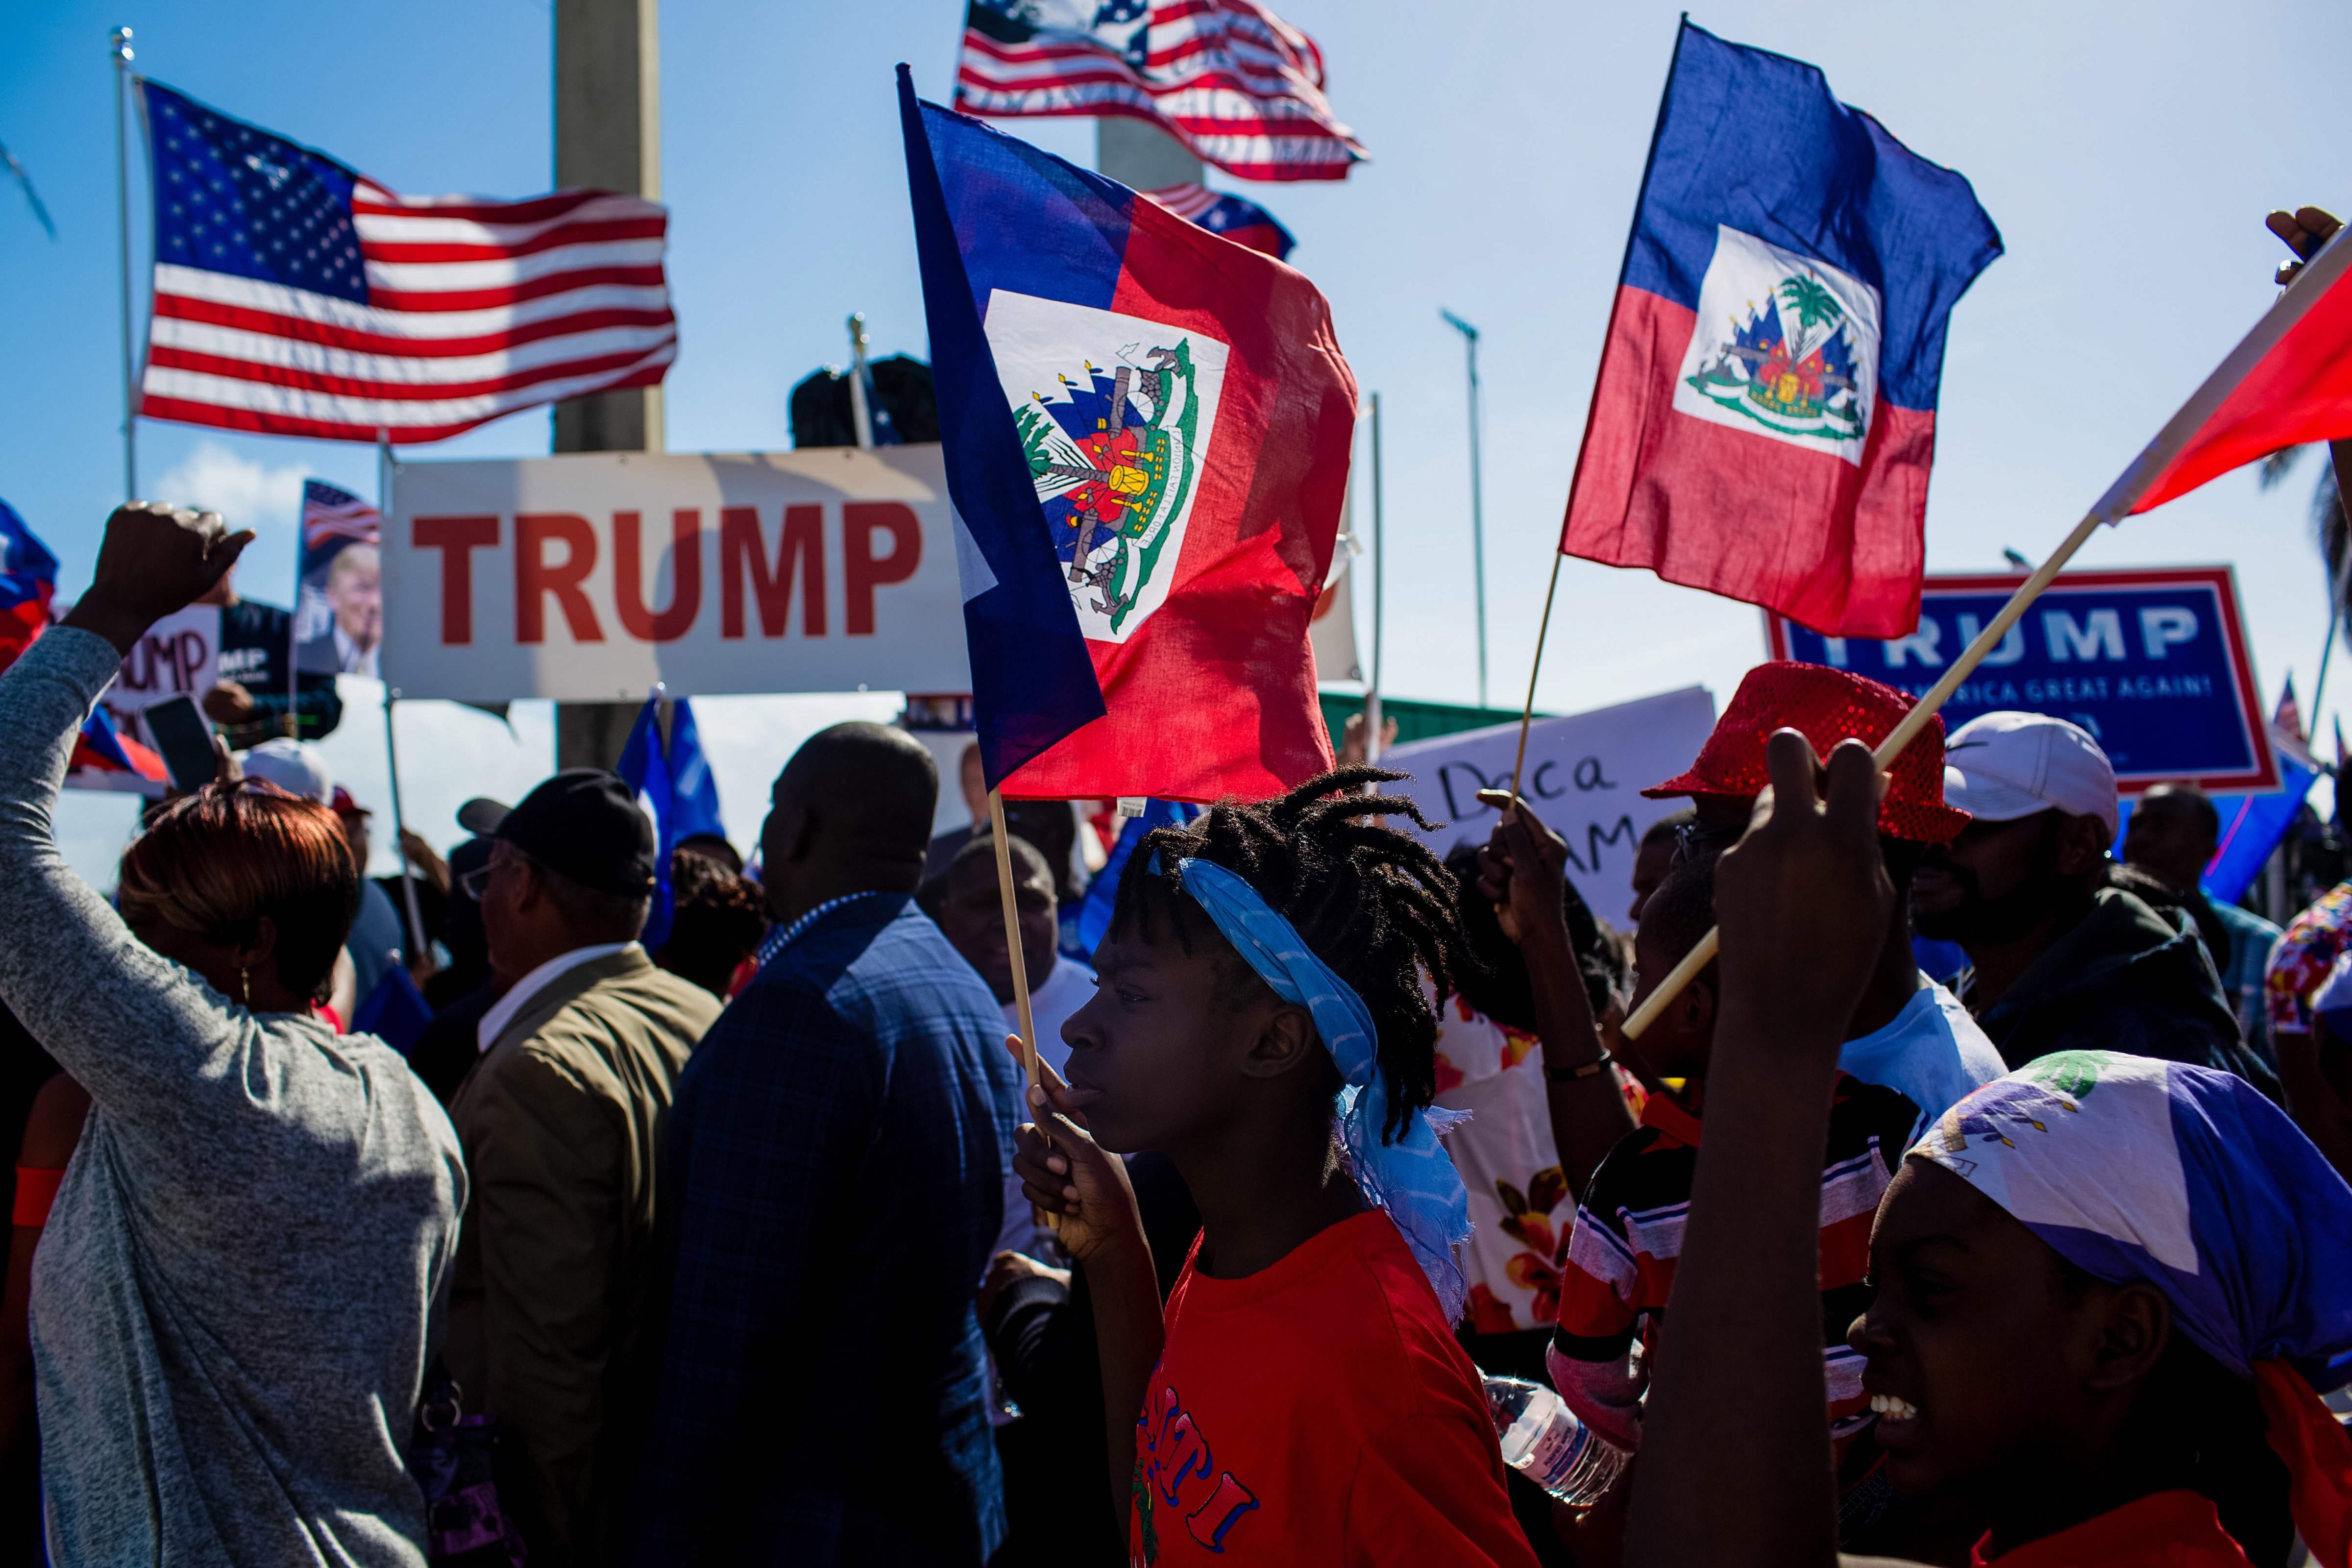 Demonstrators hold Haitian and American flags during a protest against U.S. President Donald Trump. (Bloomberg&mdash;Bloomberg via Getty Images)